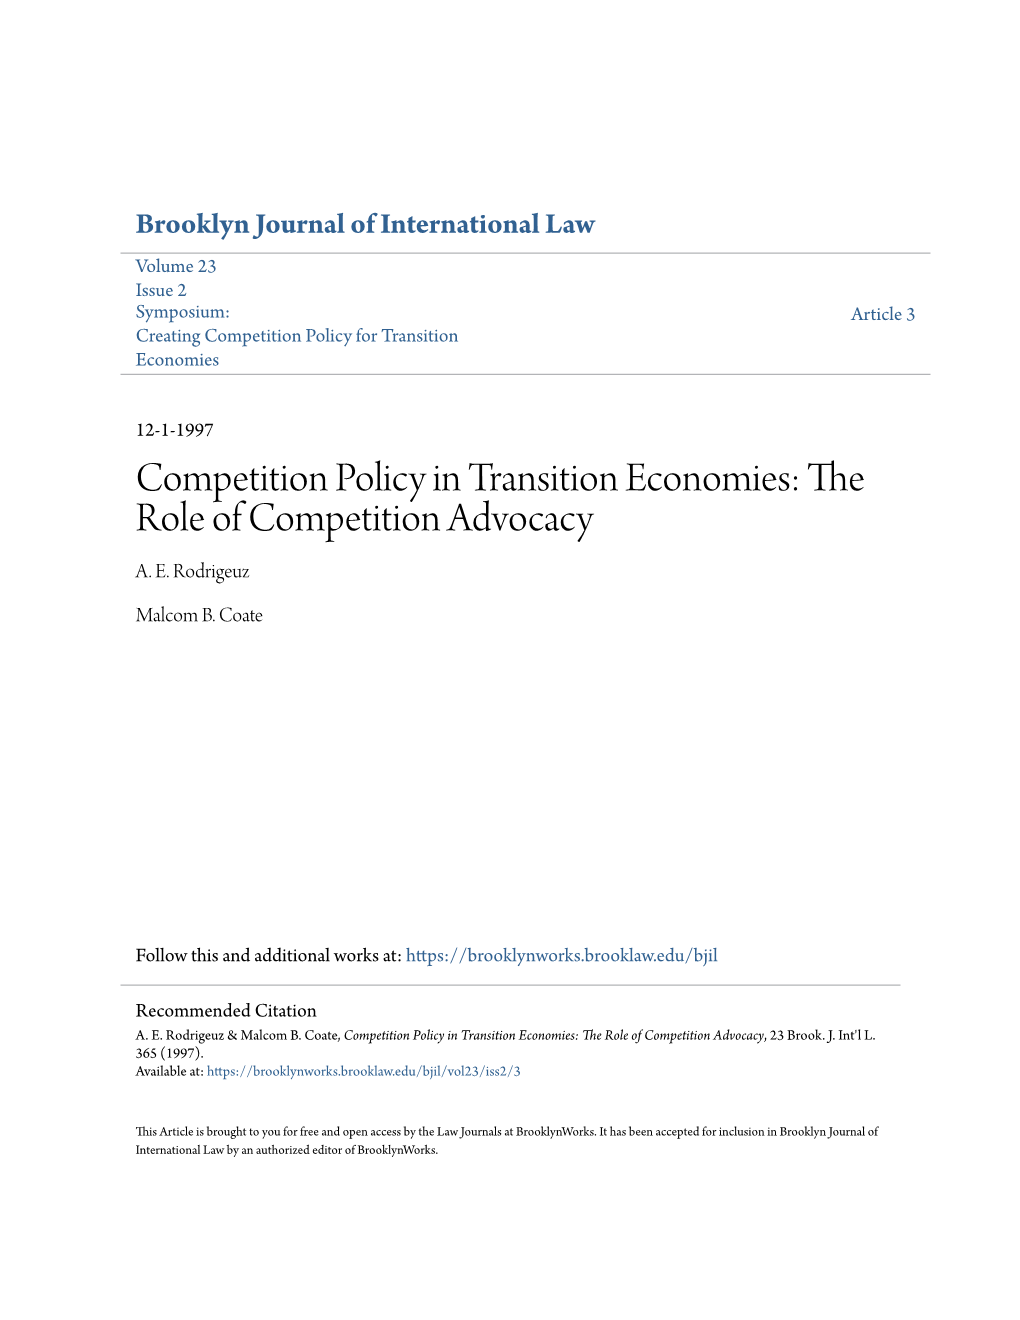 Competition Policy in Transition Economies: the Role of Competition Advocacy A